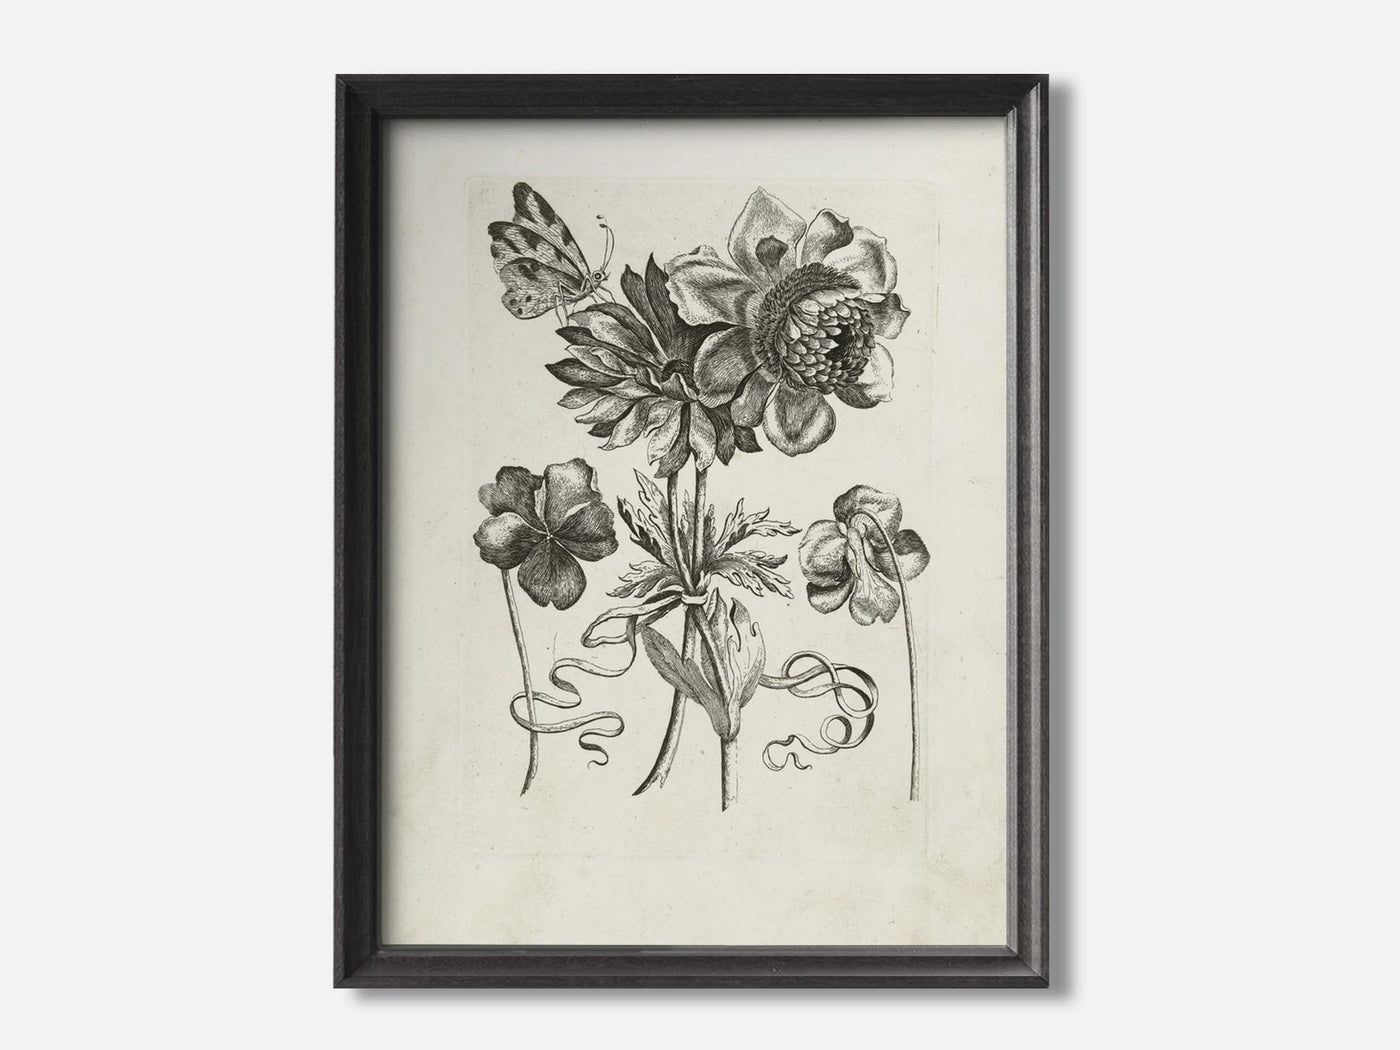 Four flowers, including two violets Art Print mockup - A_d66-V1-PC_F+B-SS_1-PS_5x7-C_def variant